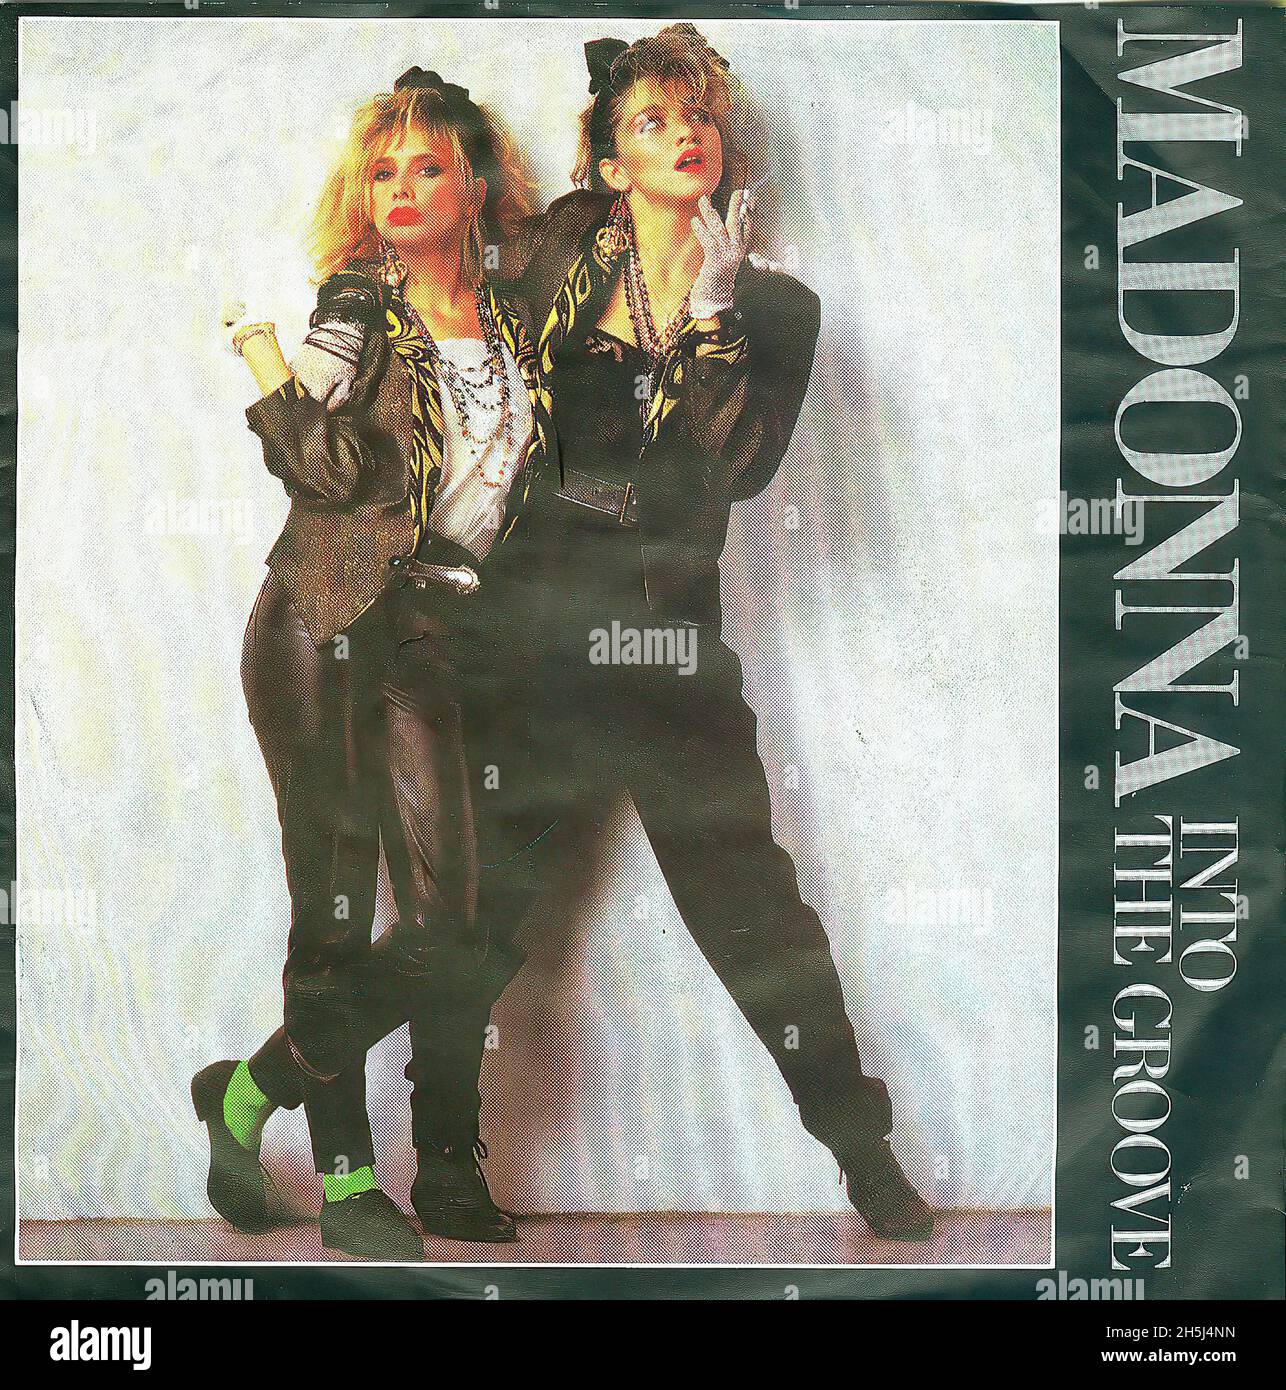 Vintage single record cover - Madonna - Into The Groove - D - 1985 Stock  Photo - Alamy